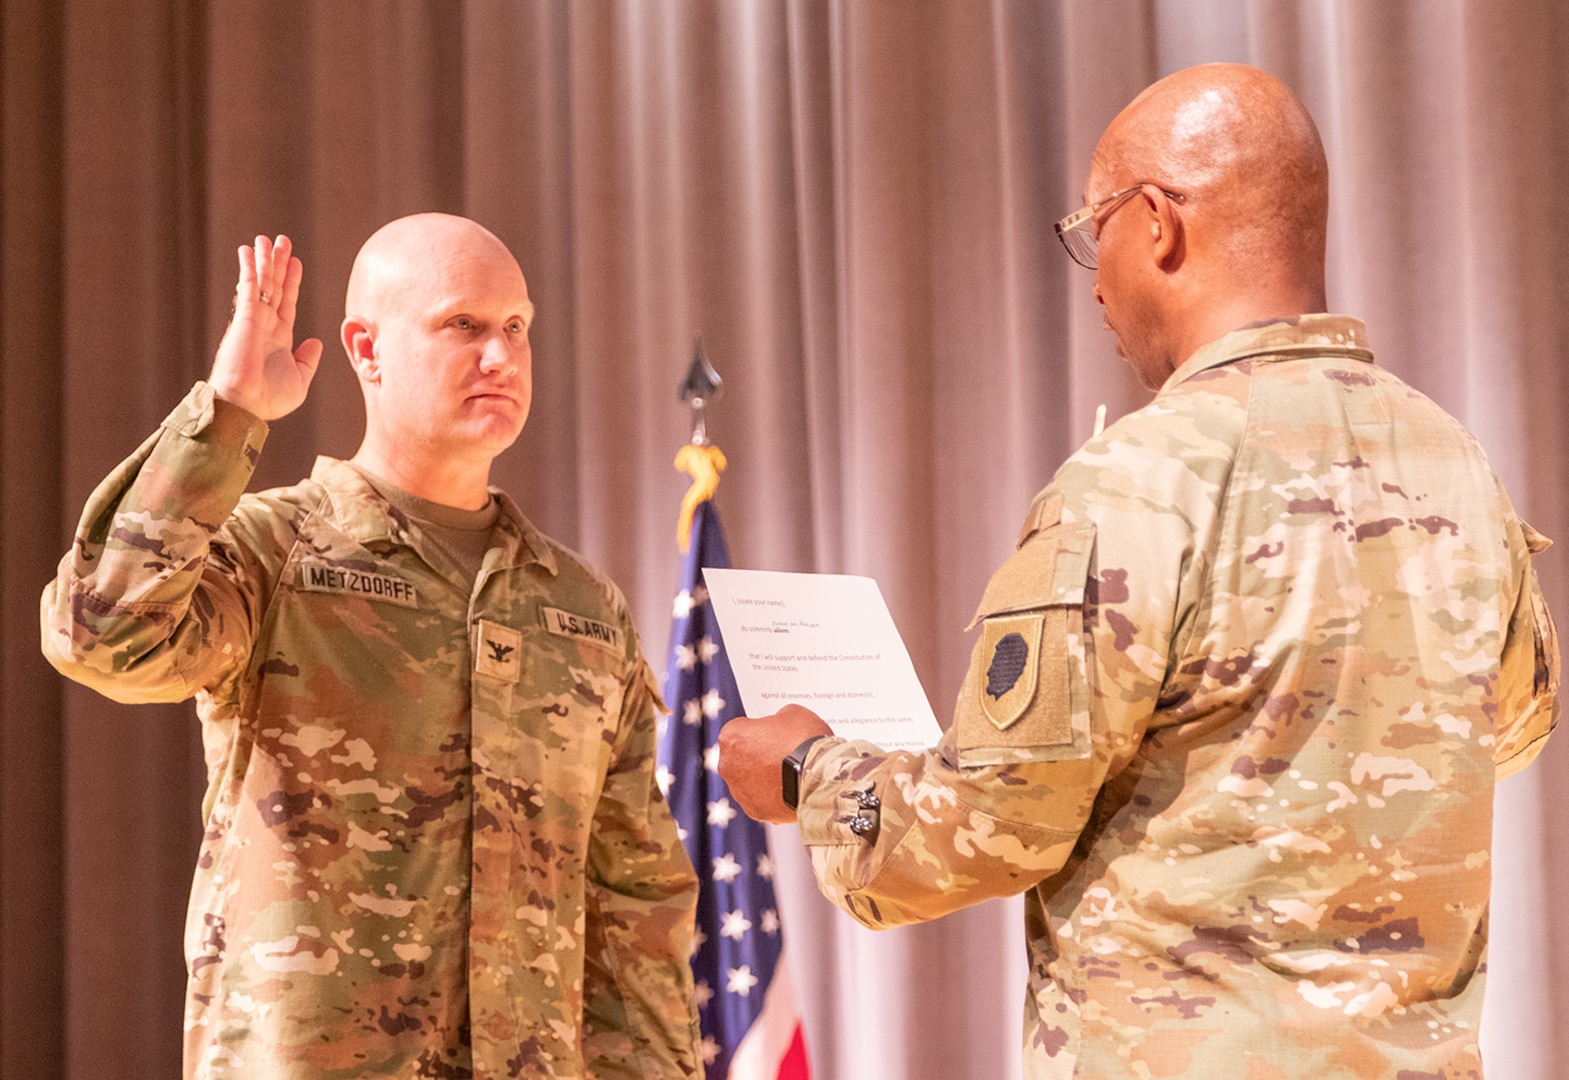 Newly promoted Illinois Army National Guard Col. Paul Metzdorff is administered the oath of office by Maj. Gen. Rodney Boyd, Assistant Adjutant General – Army and Commander of the Illinois Army National Guard, Sept. 8 during a promotion ceremony at the Astroth Community Education Center, Heartland Community College, Normal, Illinois.